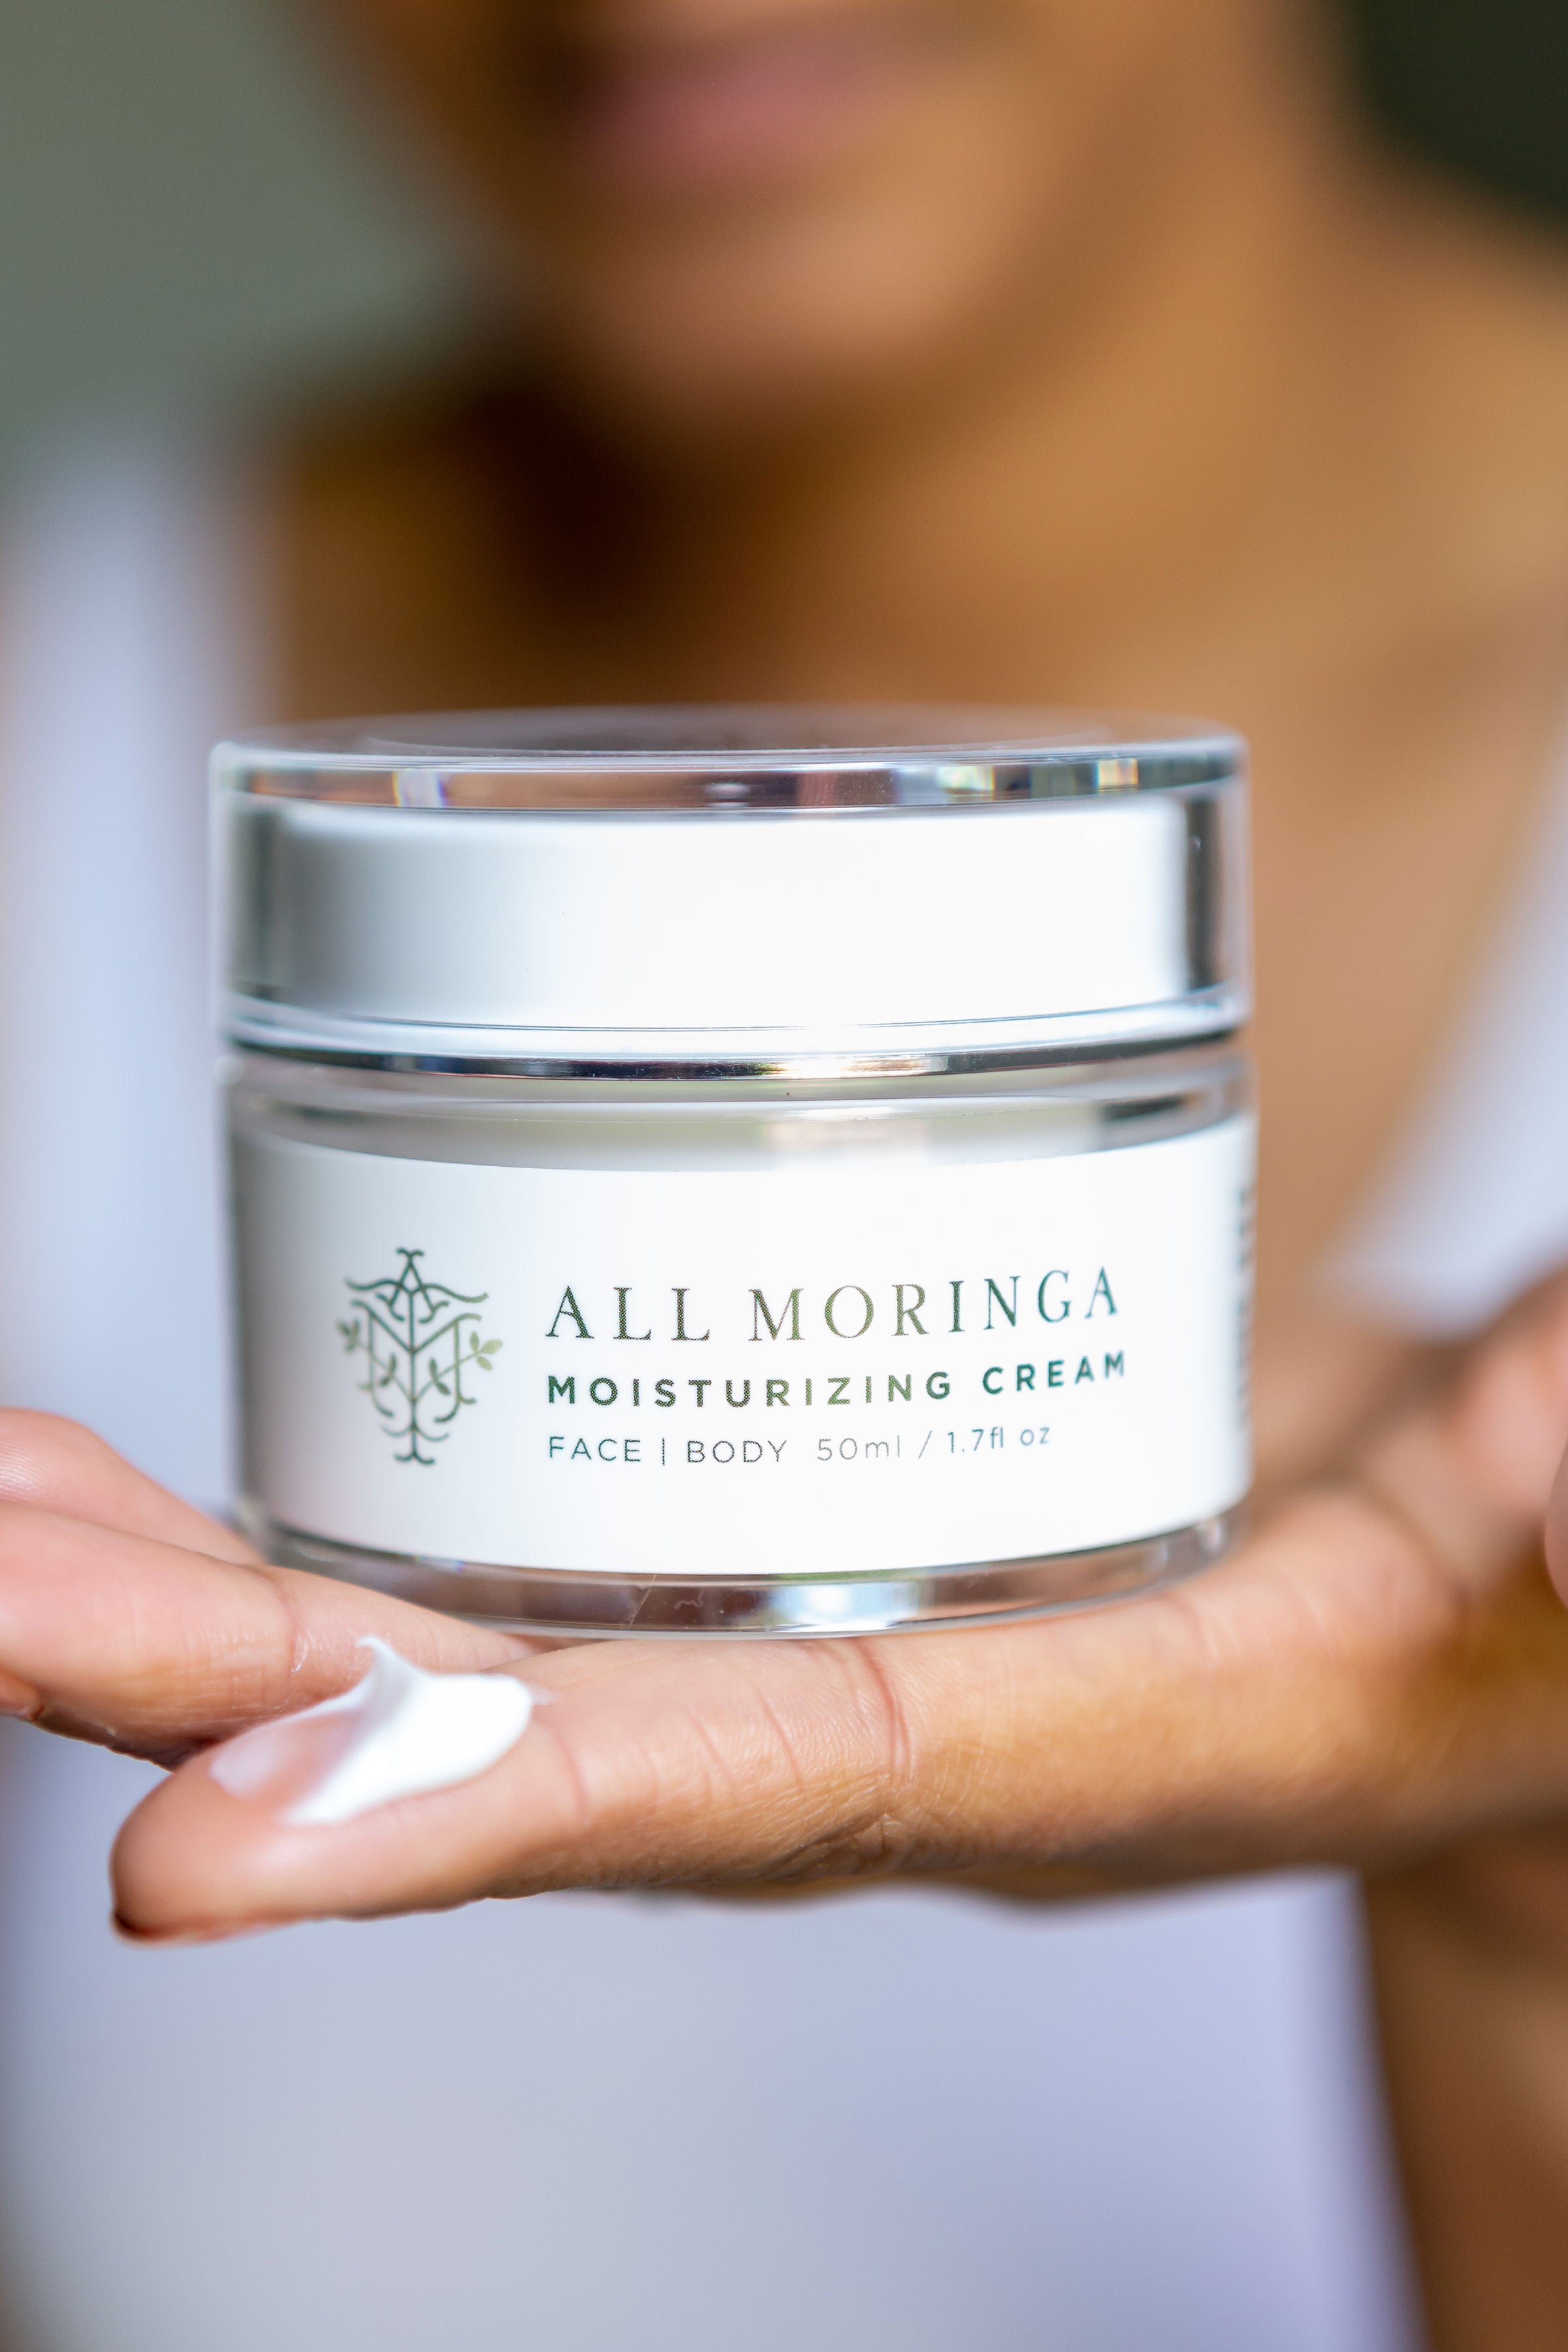 Shop Gluten Free Miracle Face Cream For Dry Skin